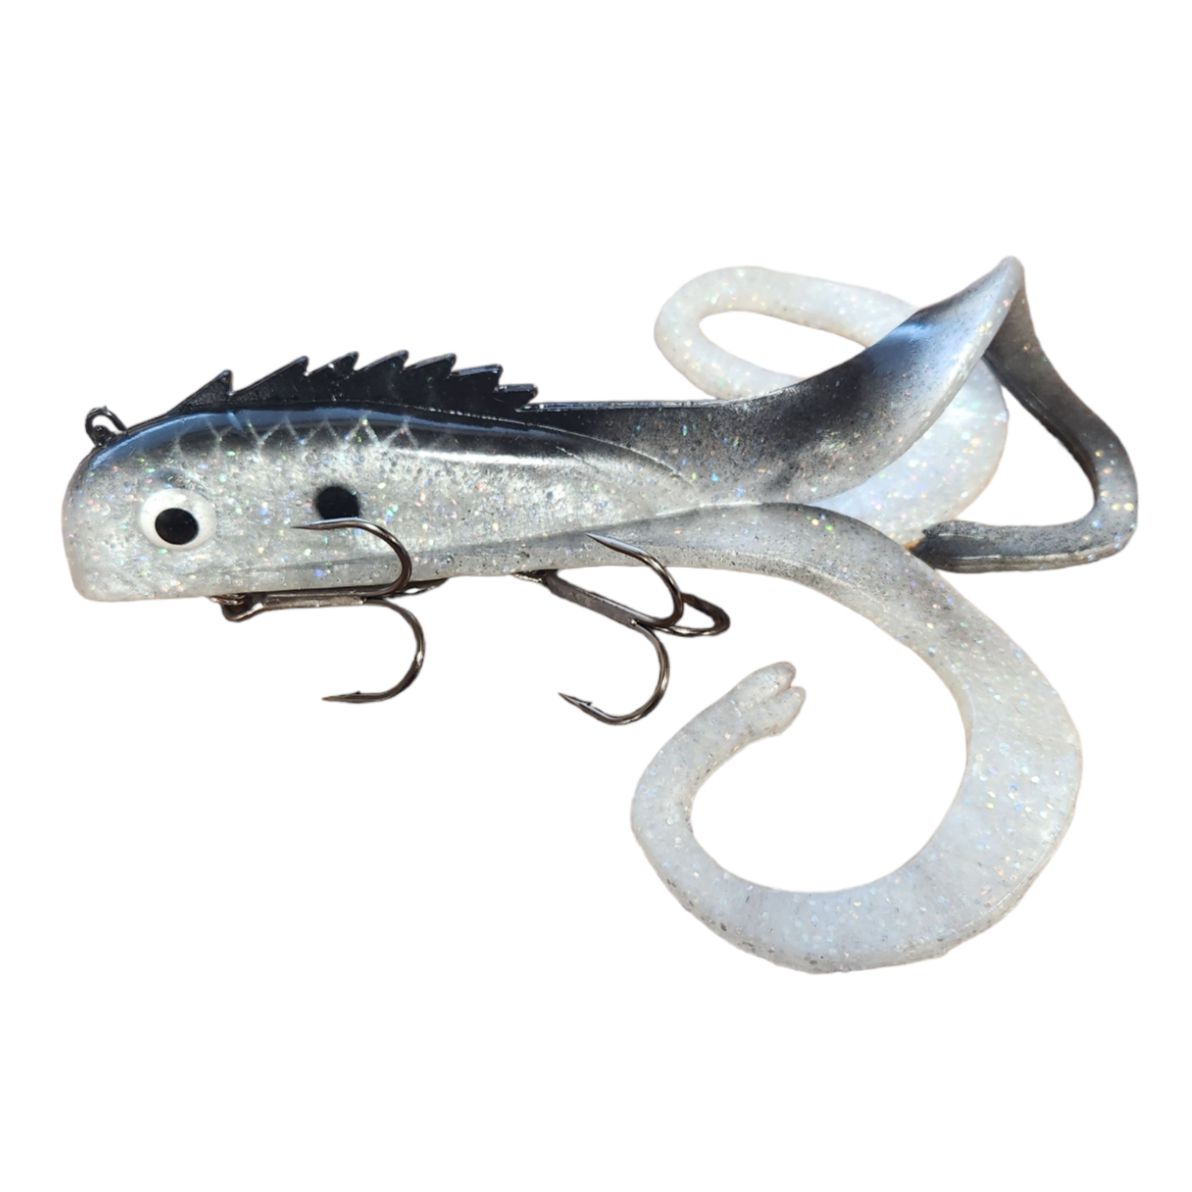 View of Rubber Chaos Tackle Medussa Regular Shallow Shad available at EZOKO Pike and Musky Shop